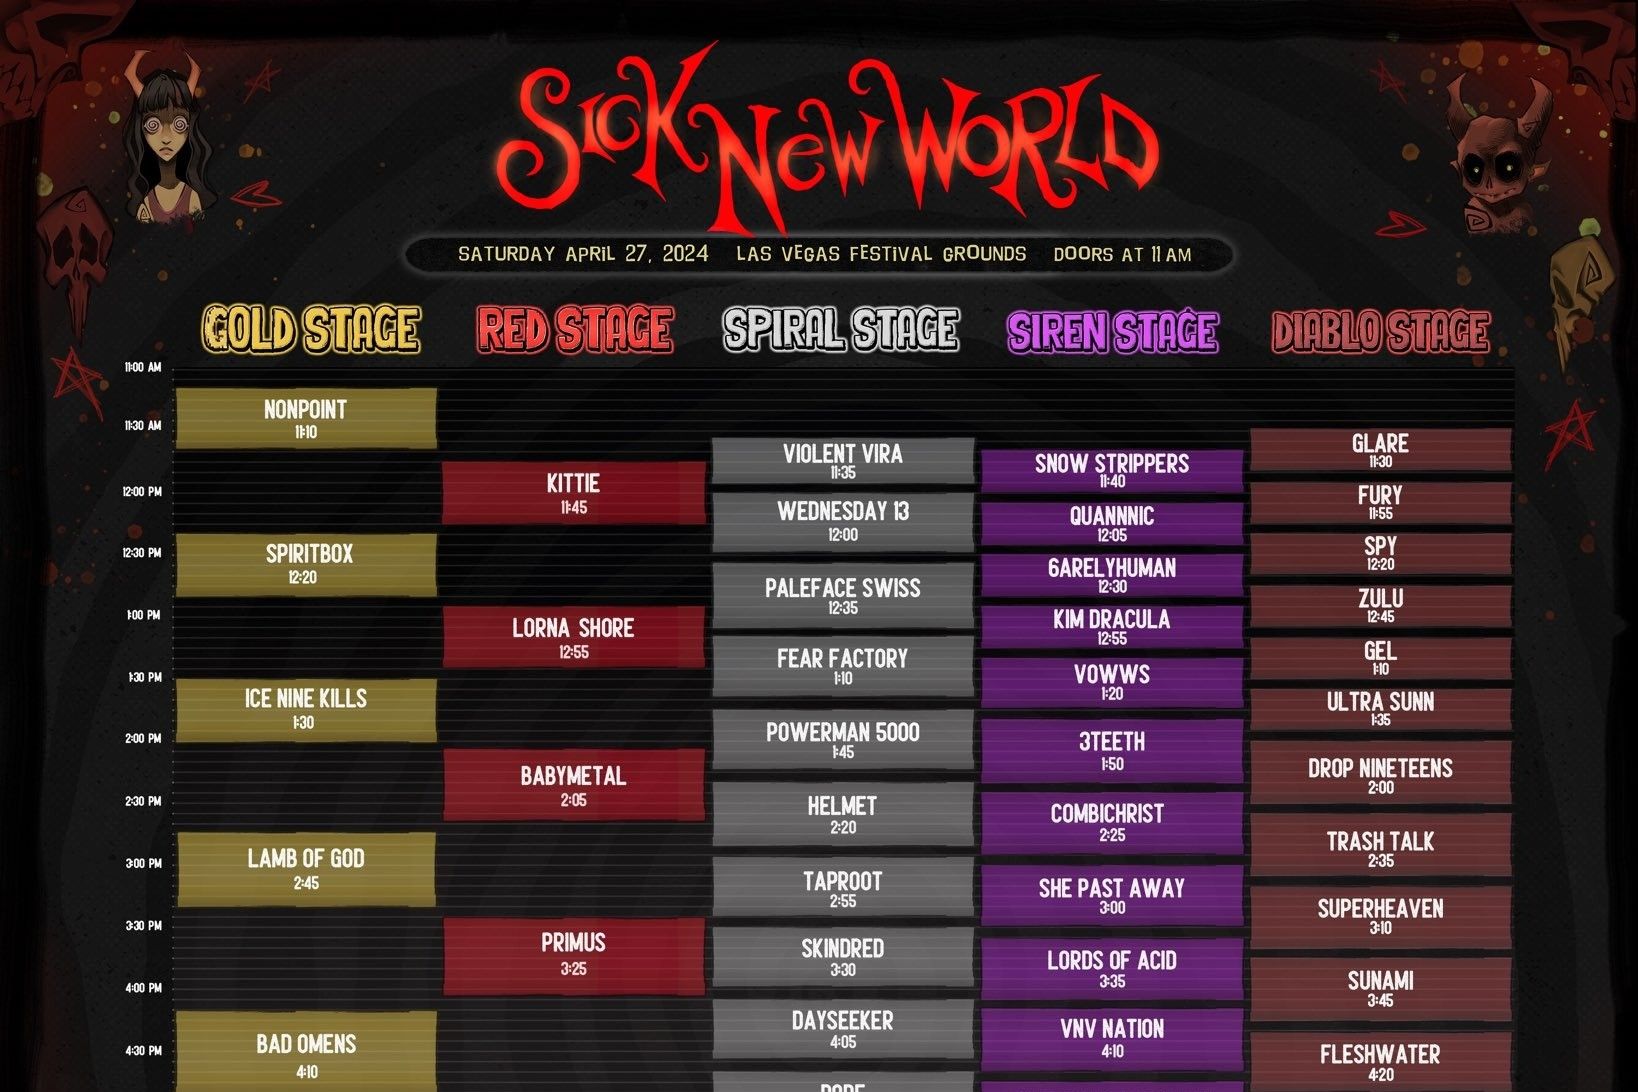 Sick New World 2024 Set Times Released